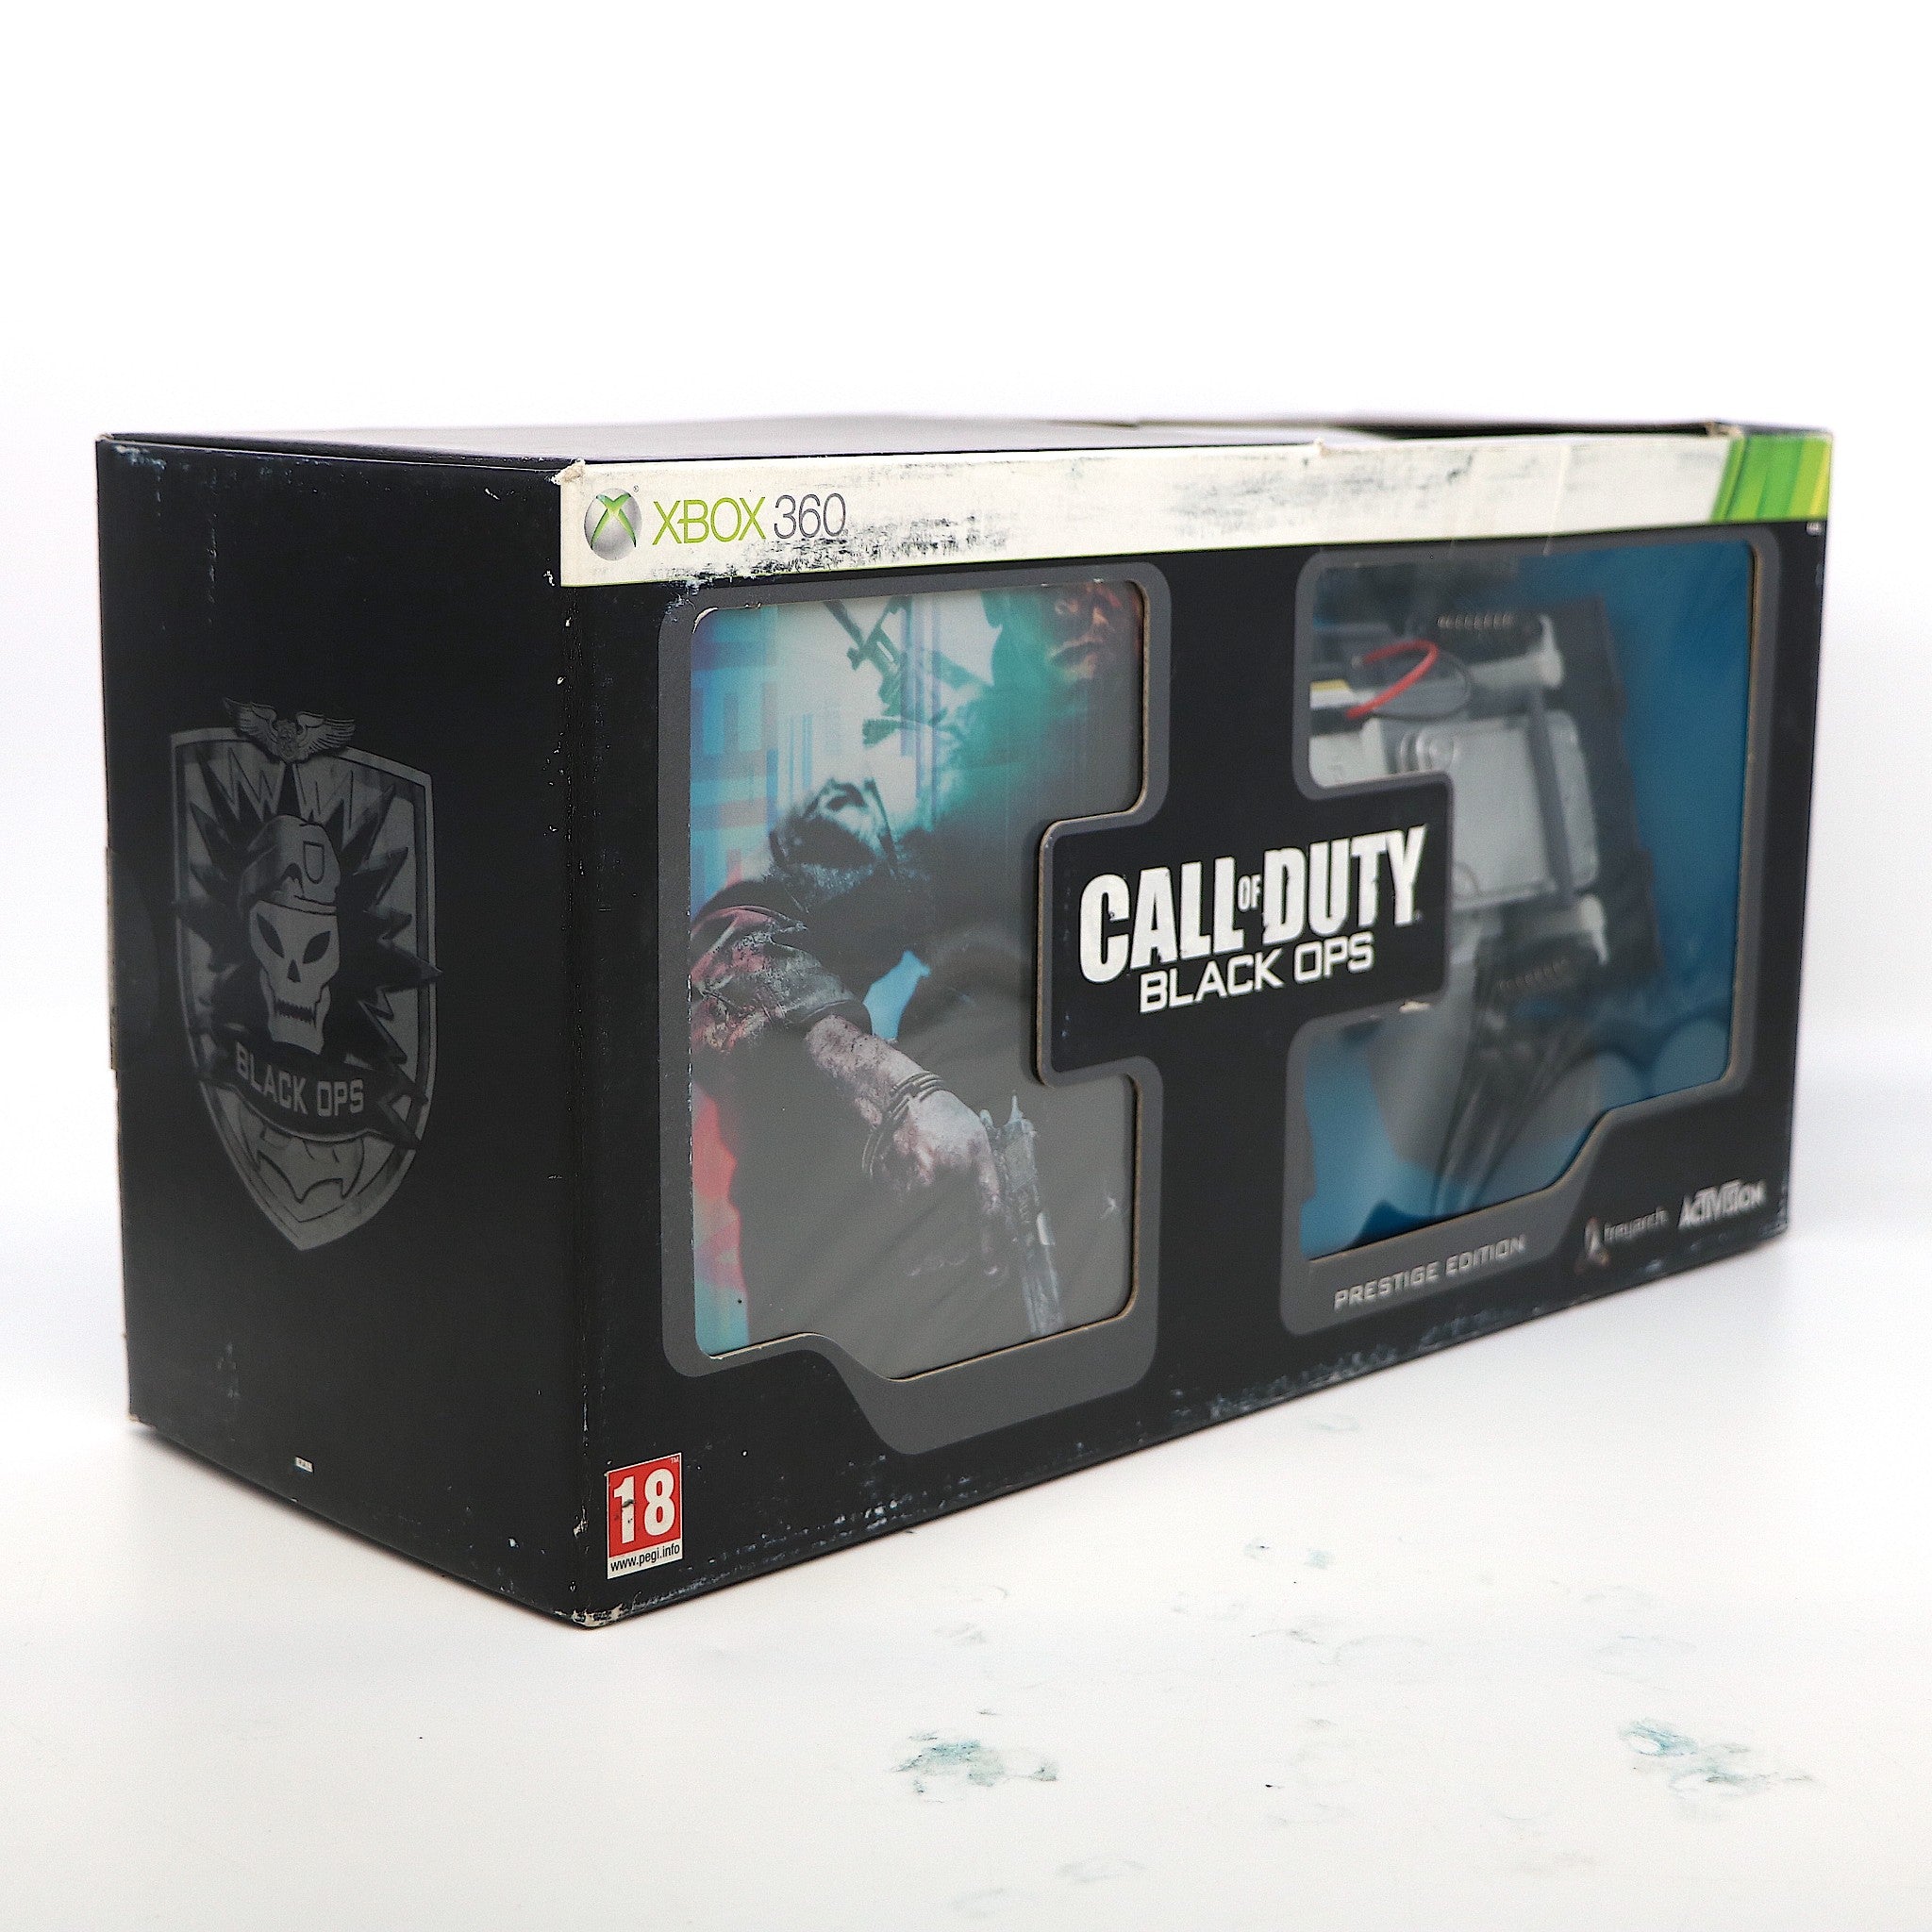 Call of Duty (COD) Black Ops | Xbox 360 Game | Prestige Edition | New & Sealed